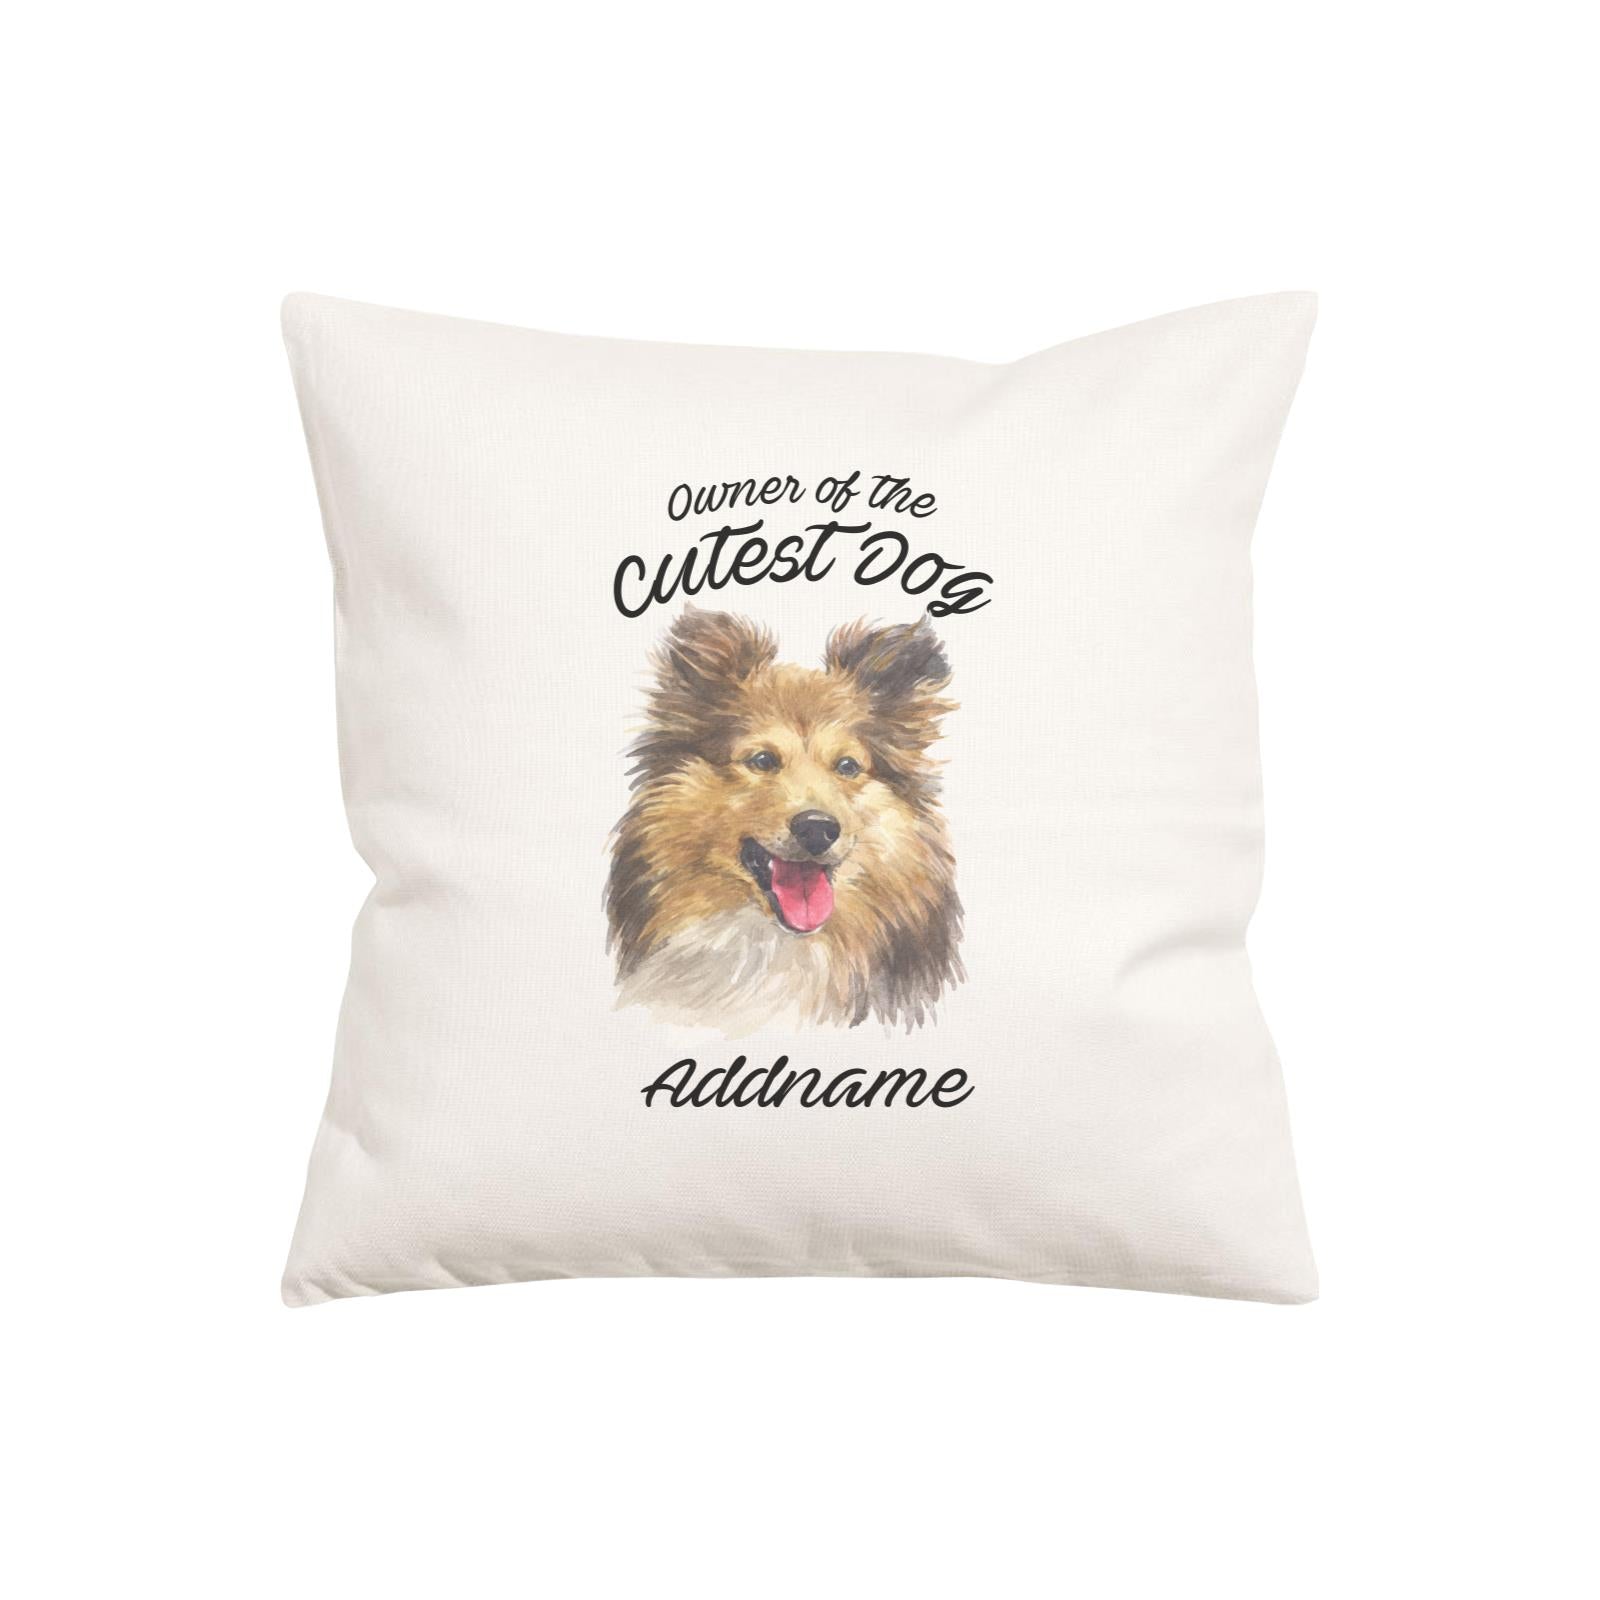 Watercolor Dog Owner Of The Cutest Dog Shetland Sheepdog Addname Pillow Cushion